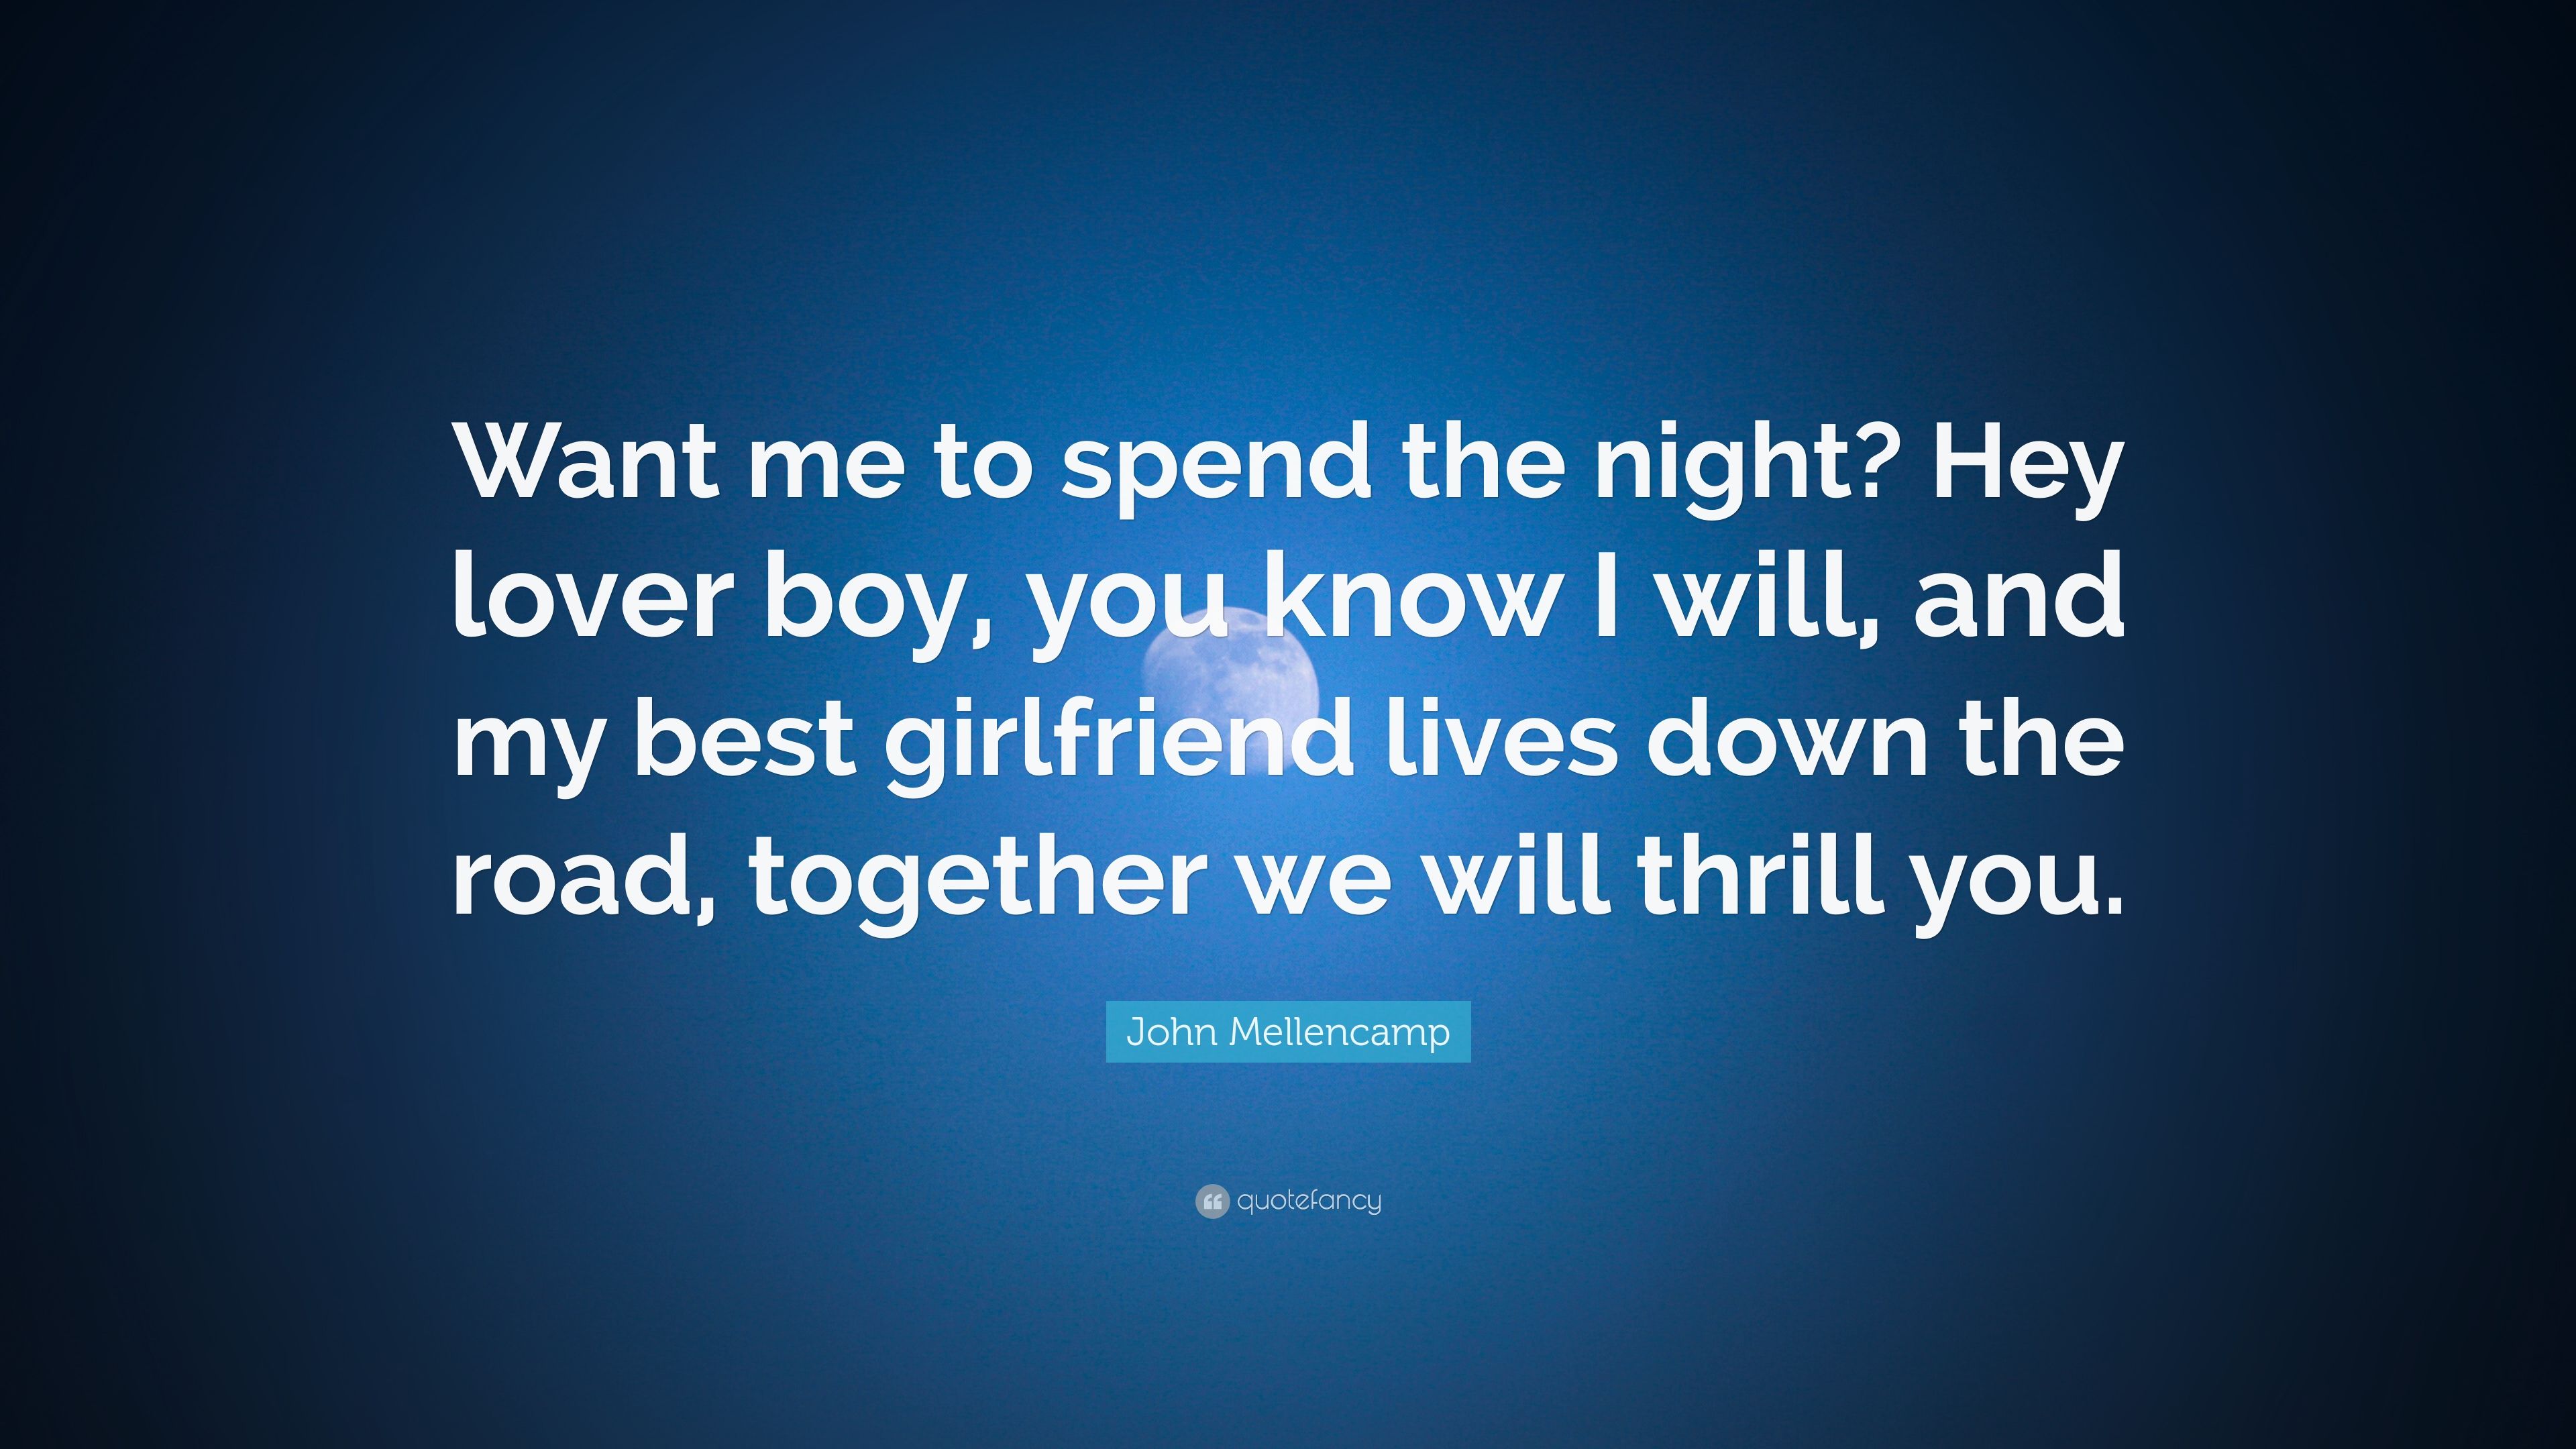 John Mellencamp Quote: “Want me to spend the night? Hey lover boy